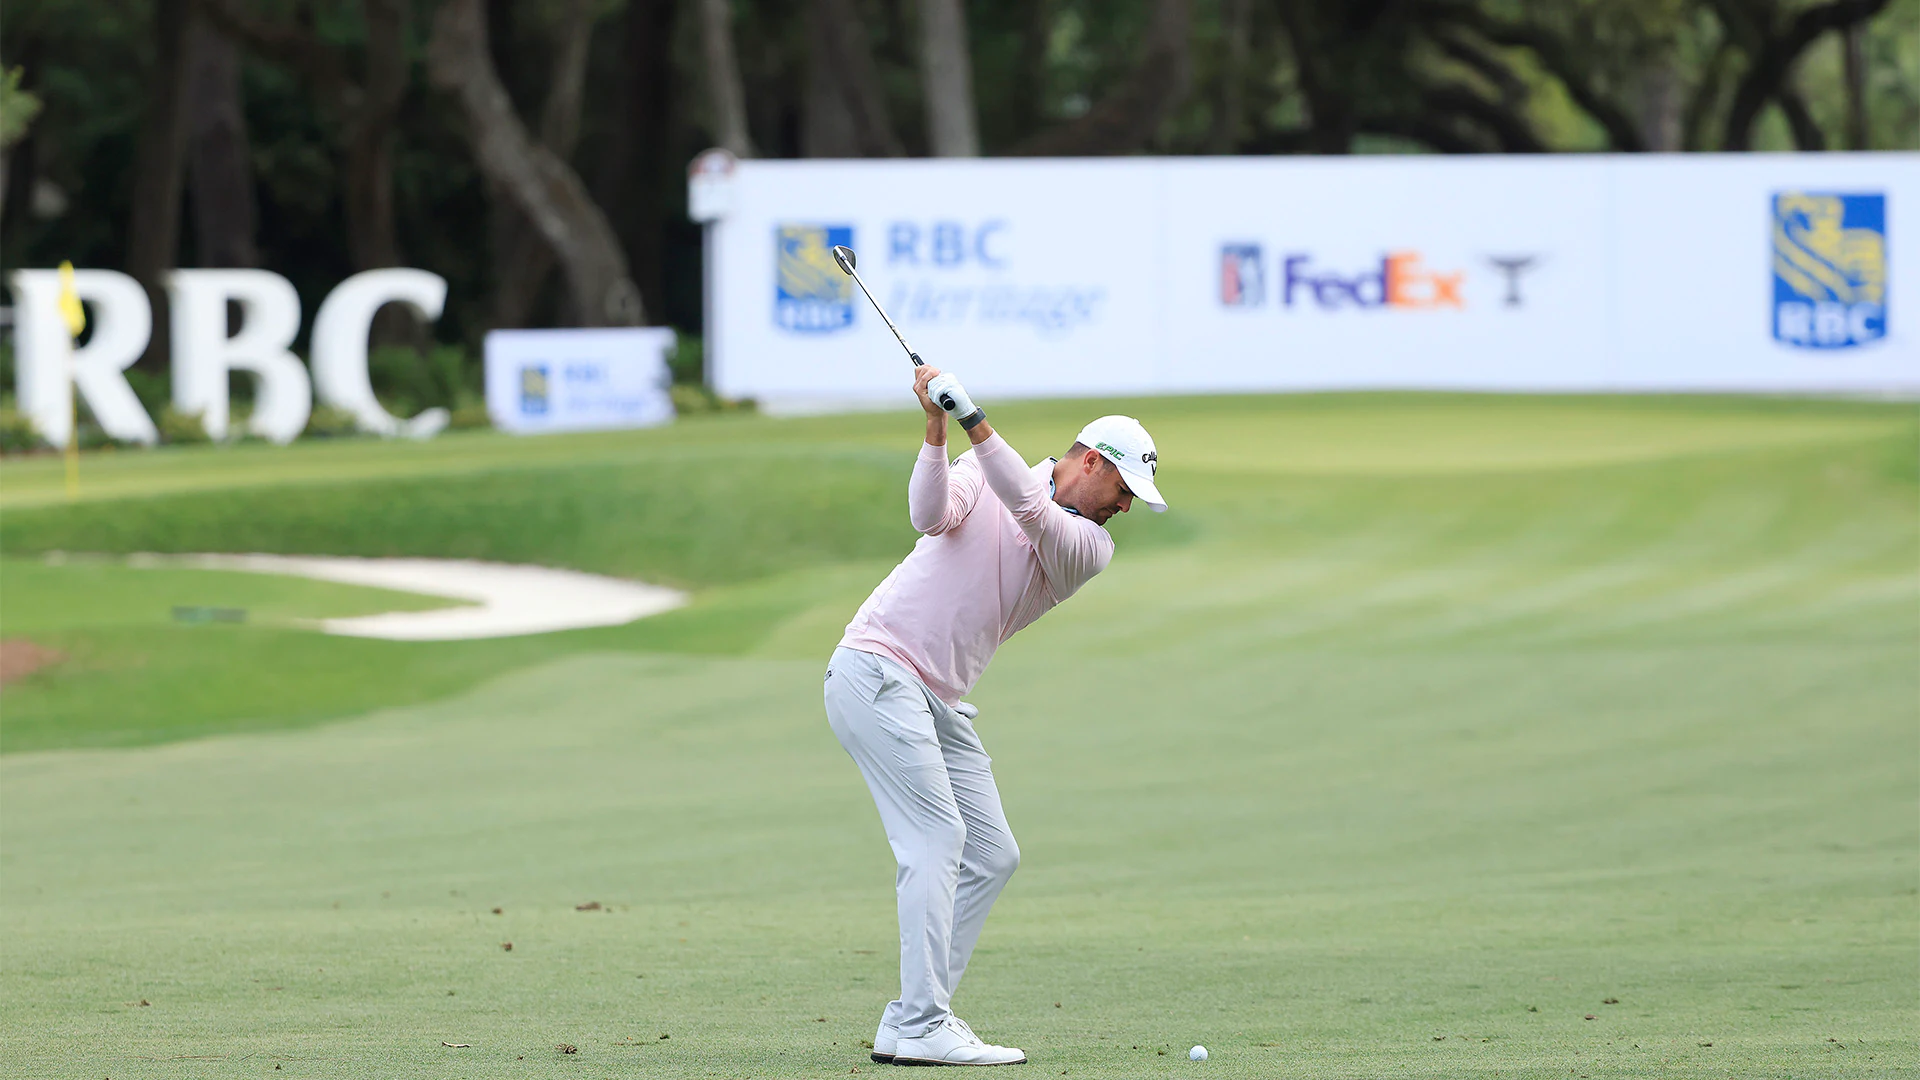 5 Things for the RBC Heritage: Big names and some big results needed